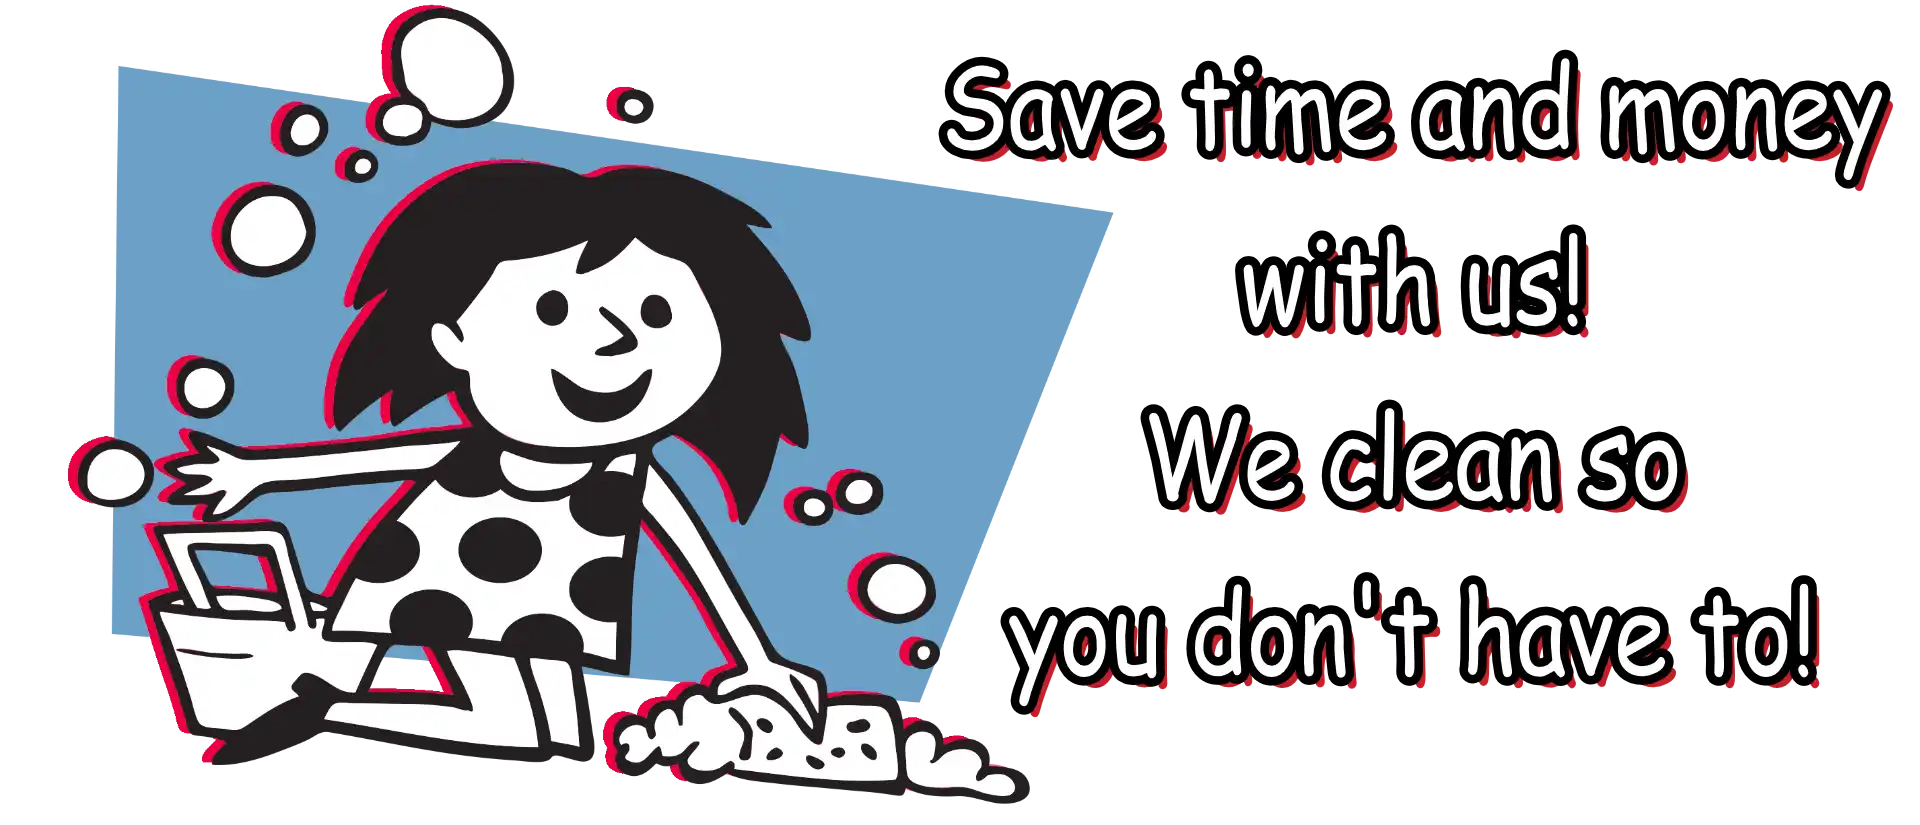 Mel's Cleaning character with bucket and sponge - Save time and money with us! We clean so you don't have to!